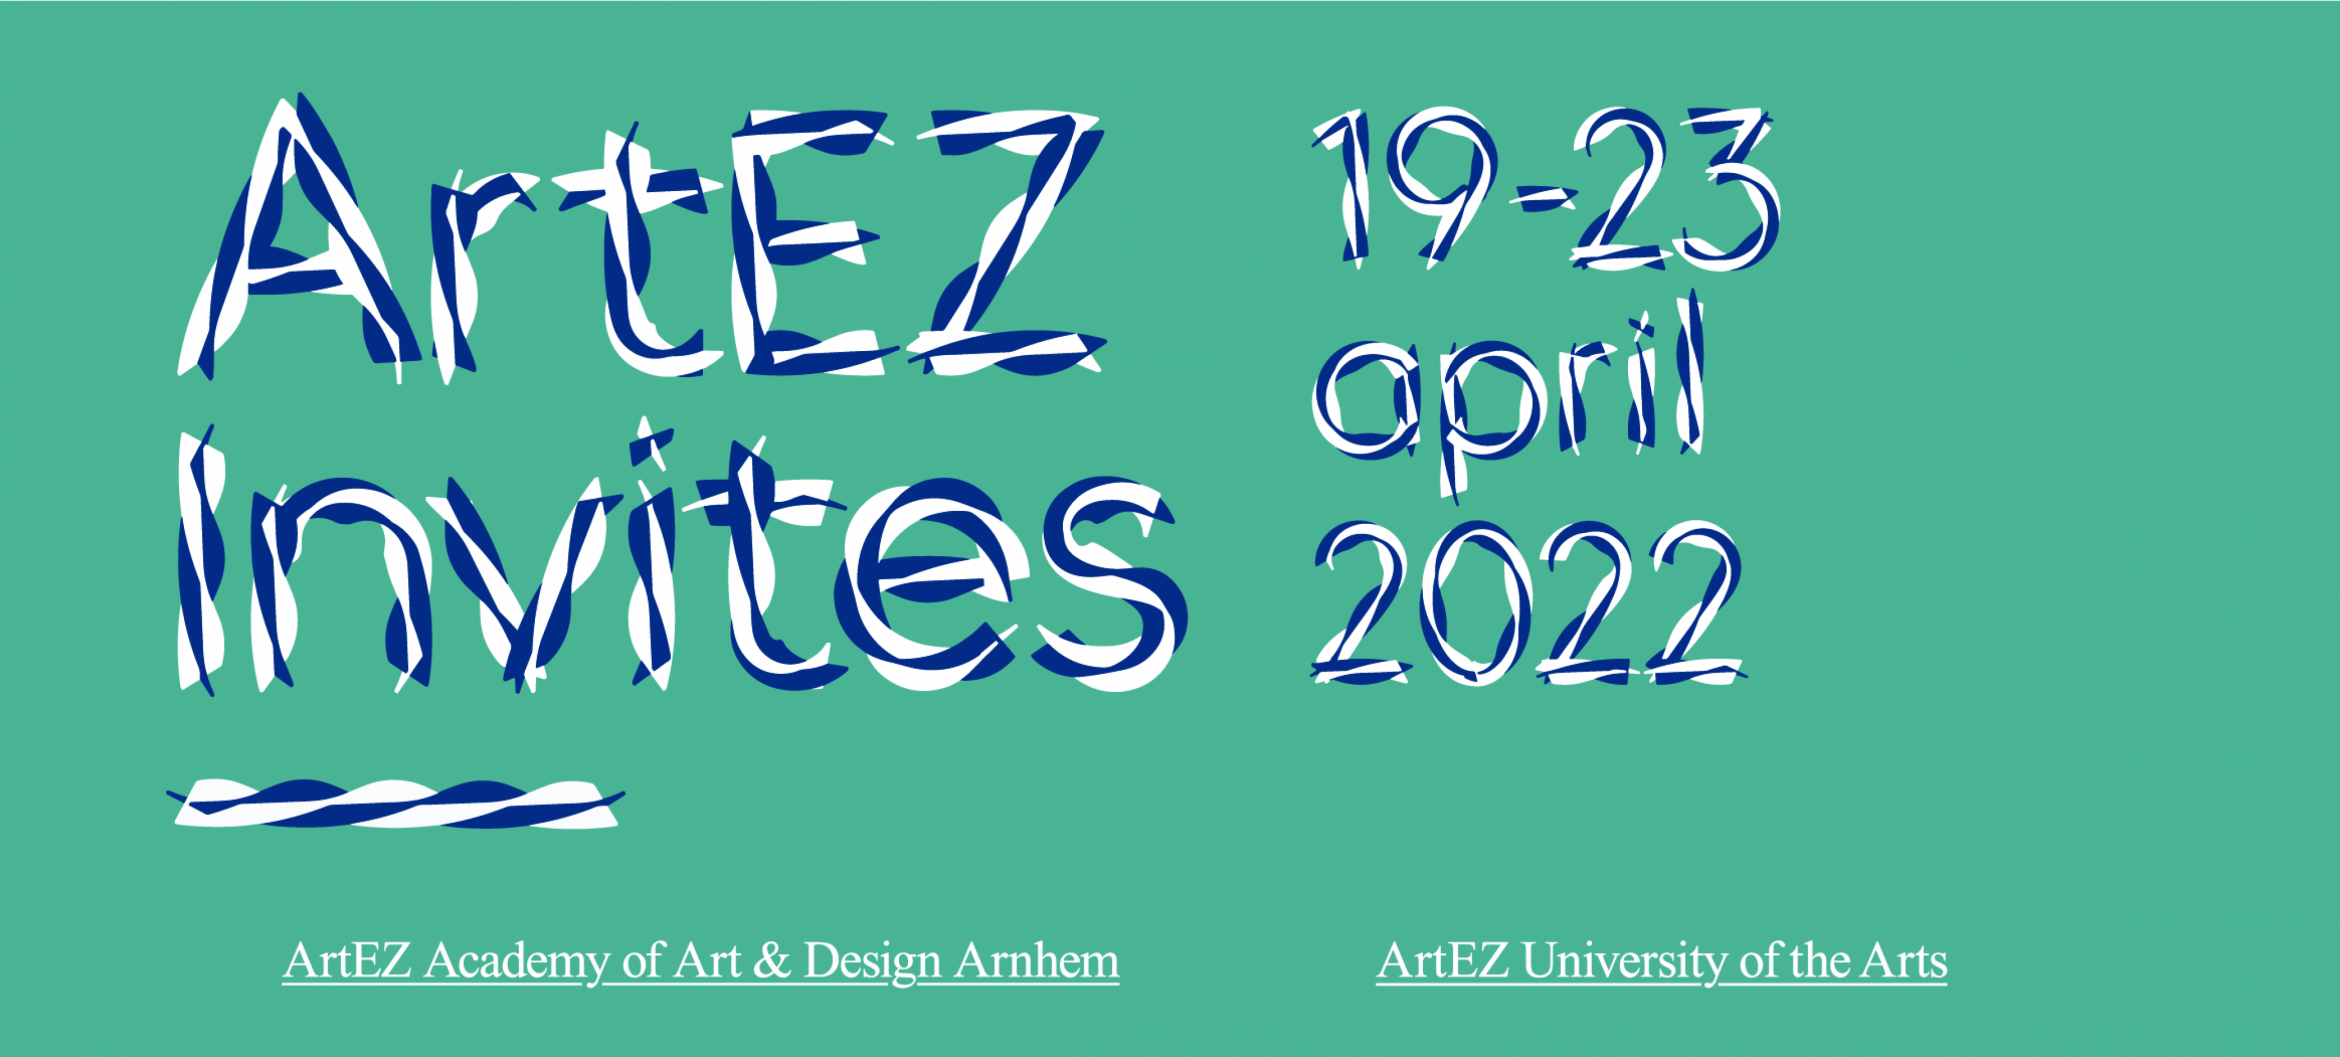 Boost your development, creative practice and network during ArtEZ Invites 19-23 April